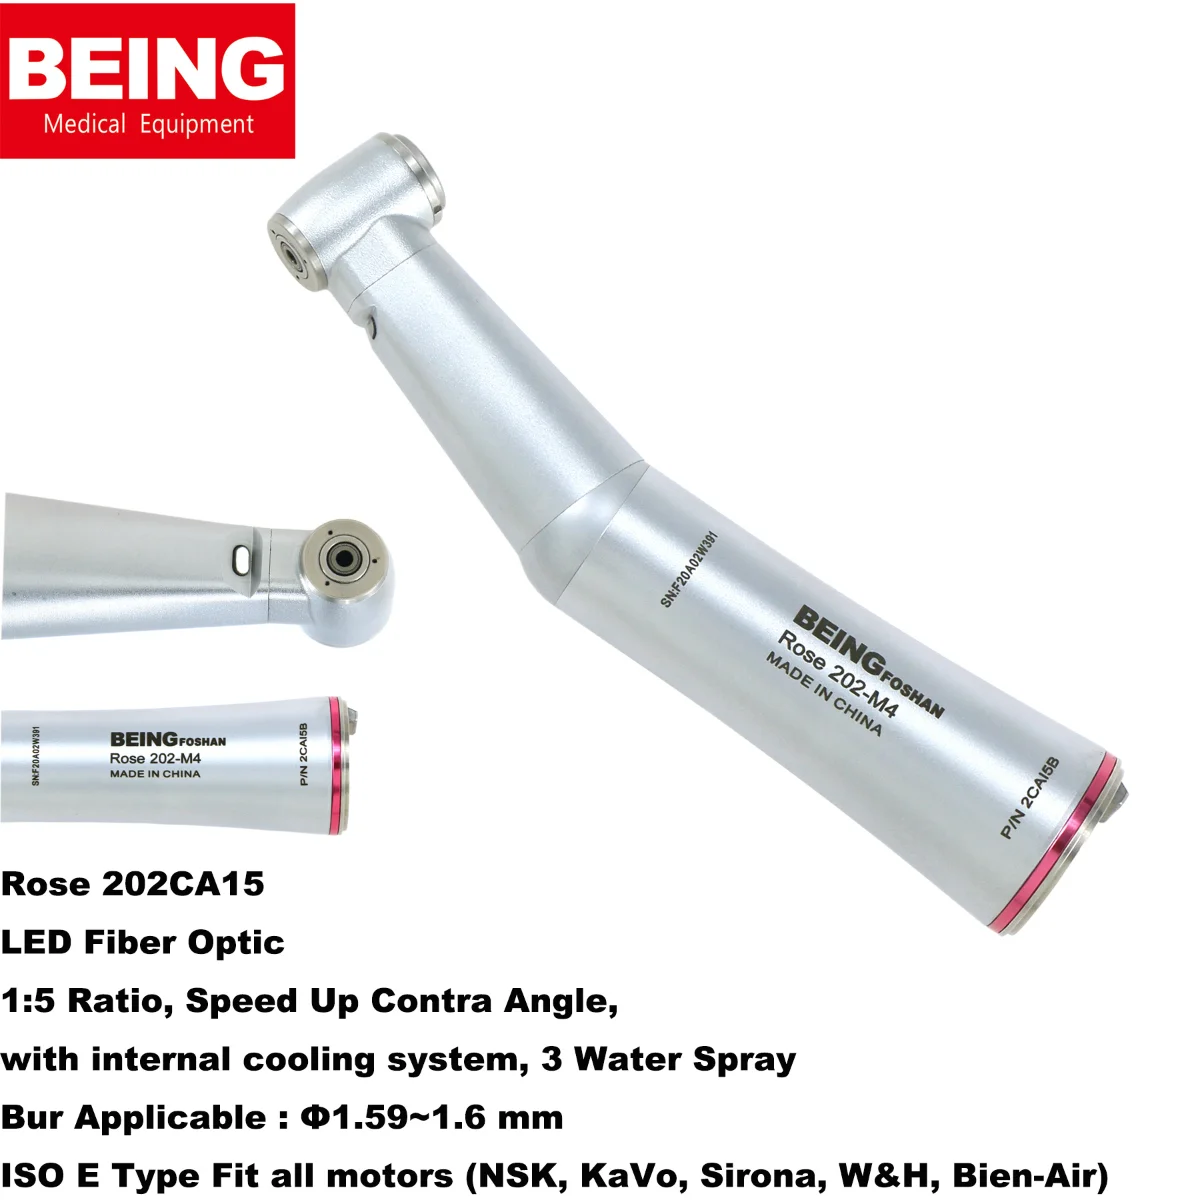 BEING Dental 1:5 Increasing Fiber Optic Handpiece LED Inner Water Contra Angle 202CA15 B with Internal Cooling System